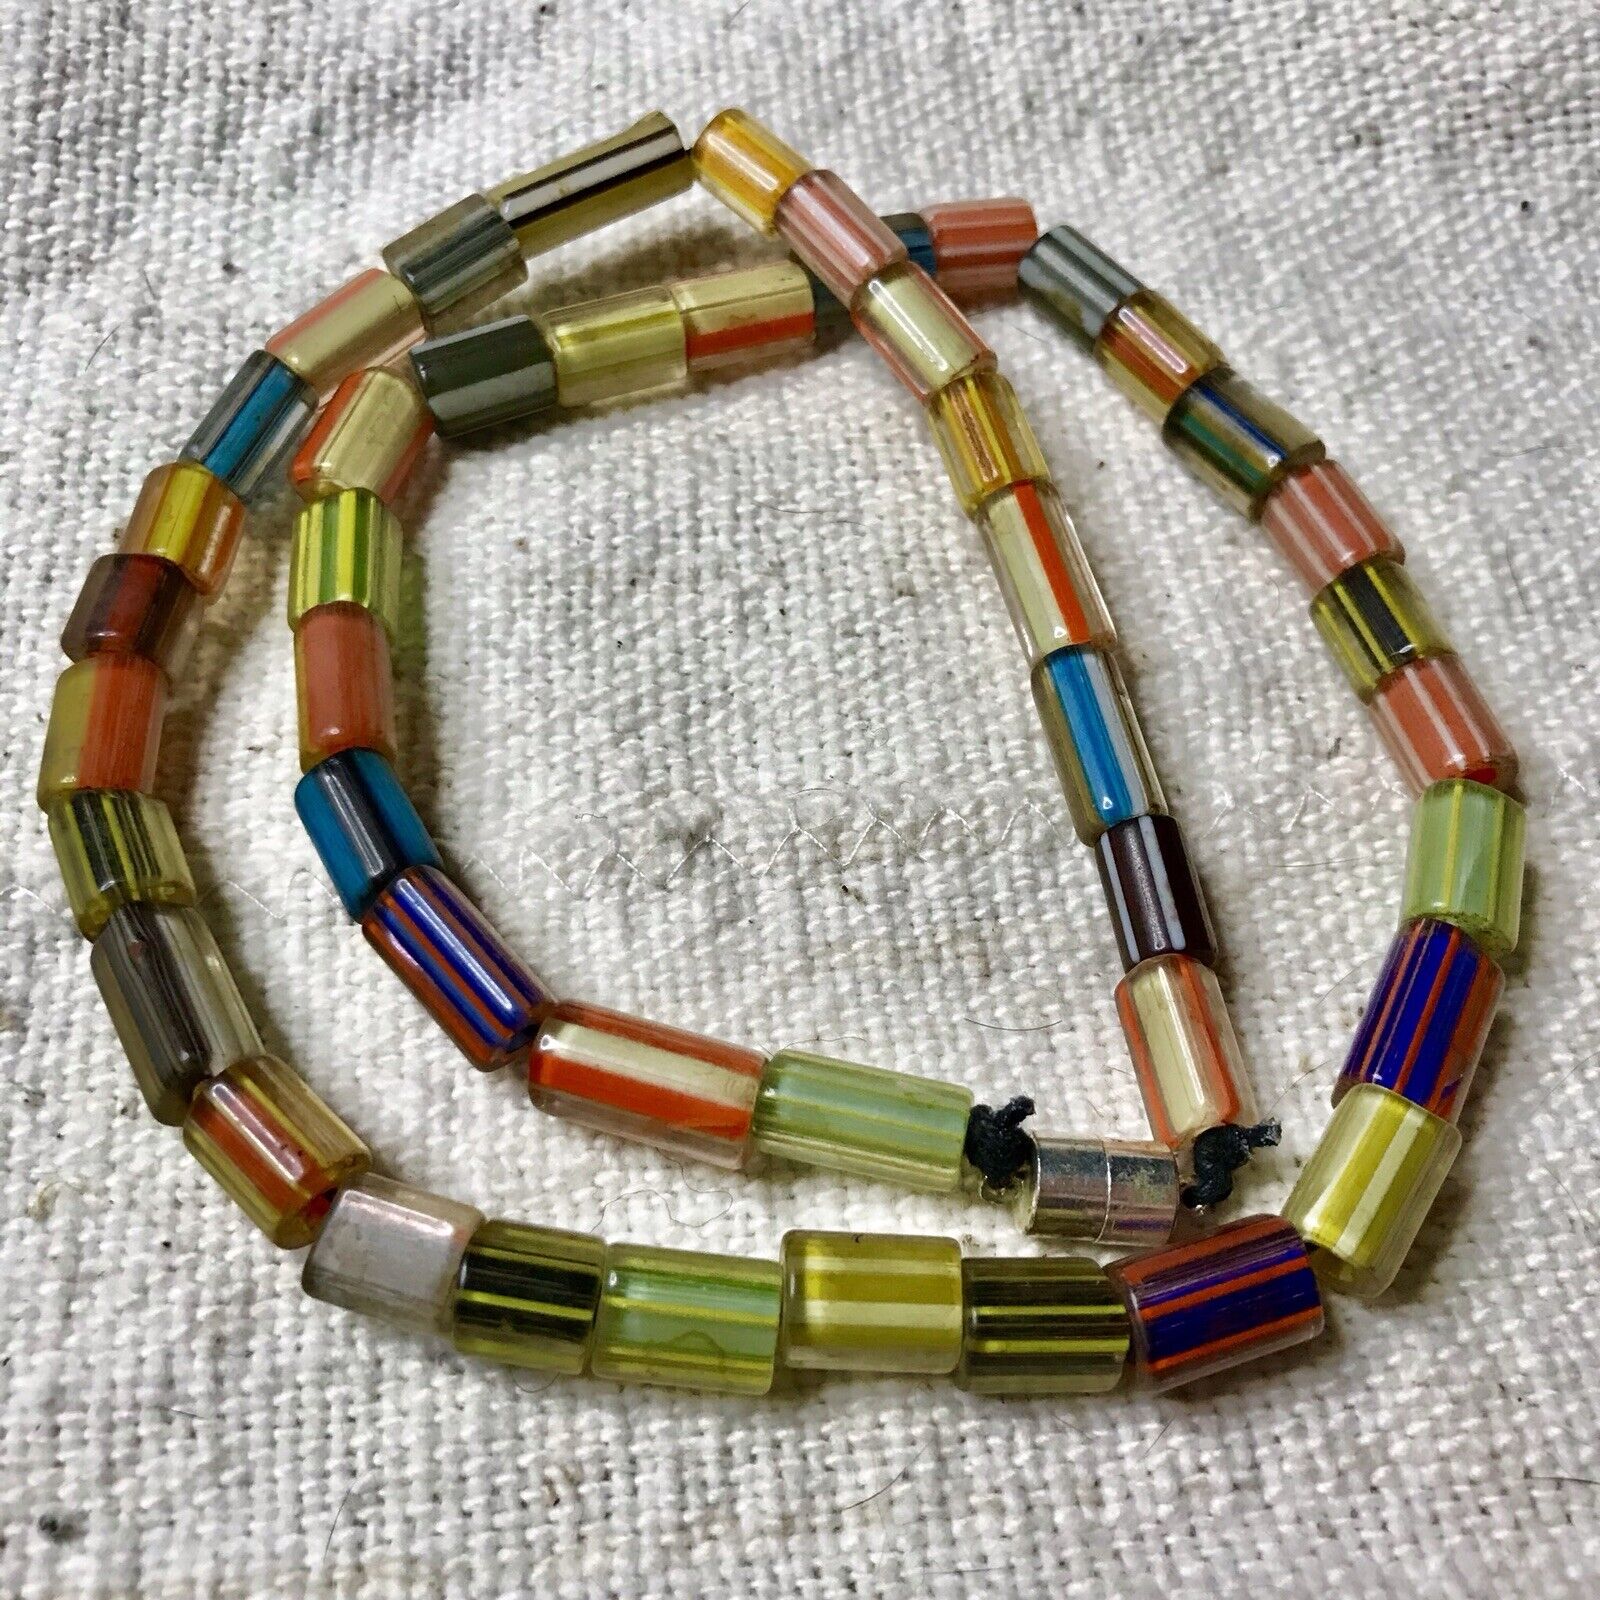 1920s Silk Road Region Candy Cane Striped Glass Bright Funky TRADE BEAD Necklace